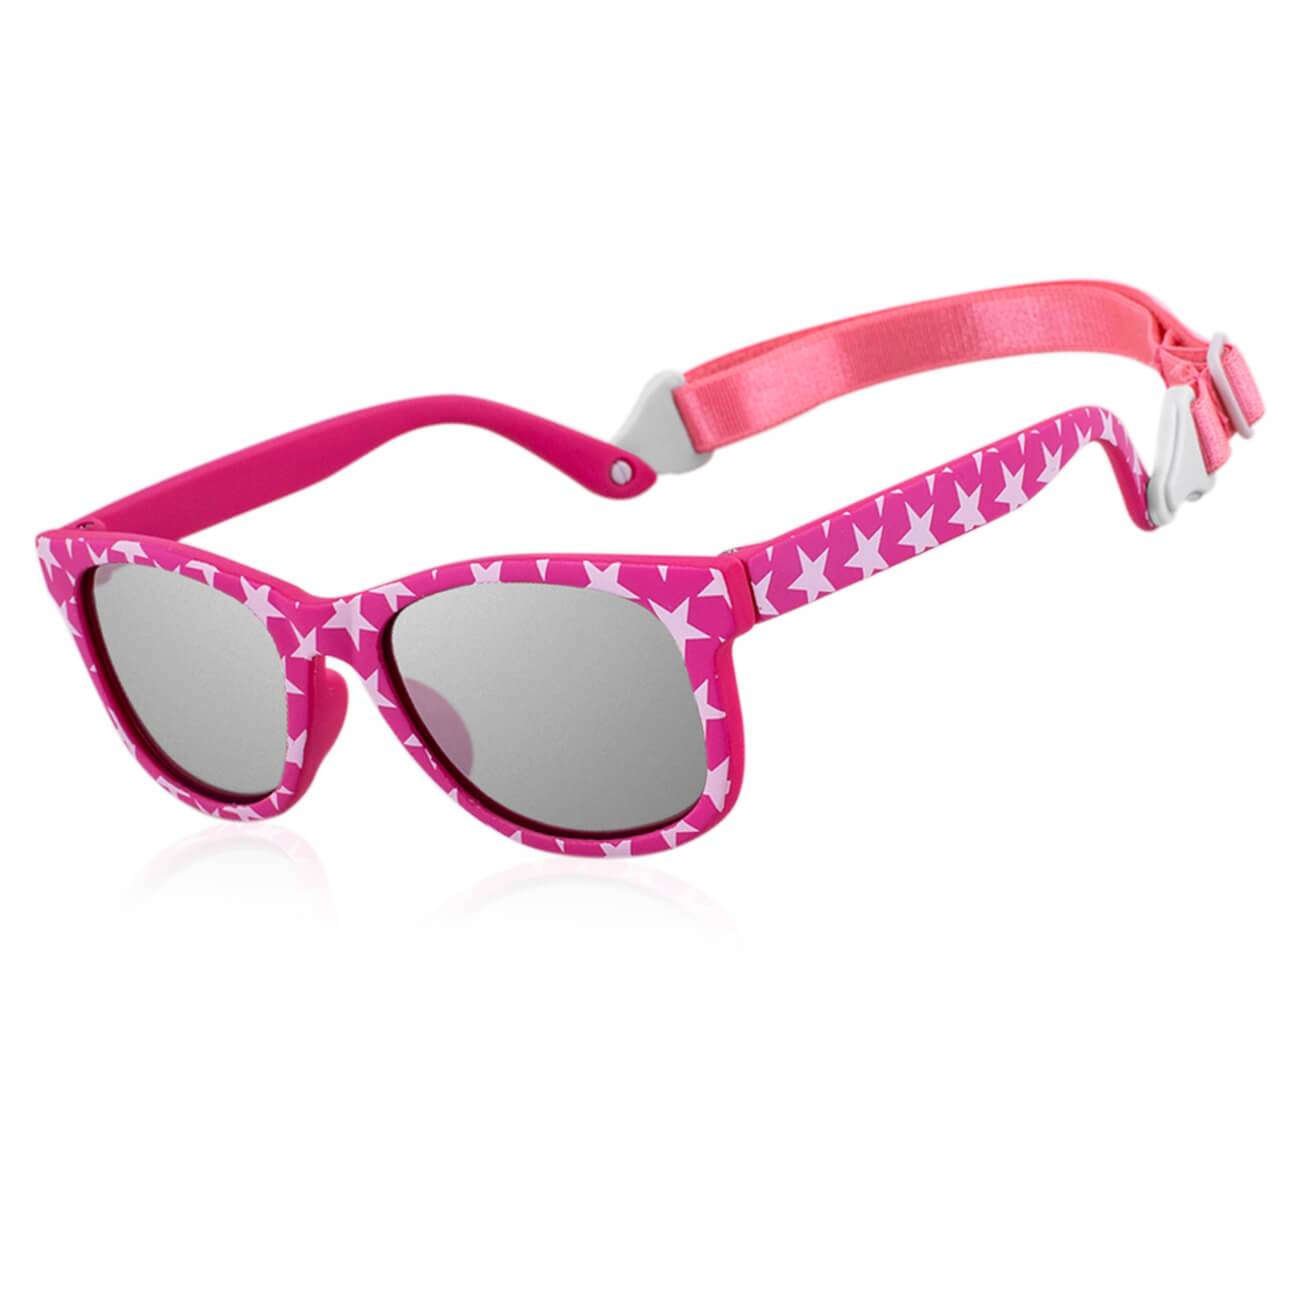 Baby Toddler Bueller Shades UV beach Sunglasses With Strap-W45-pink&rose star